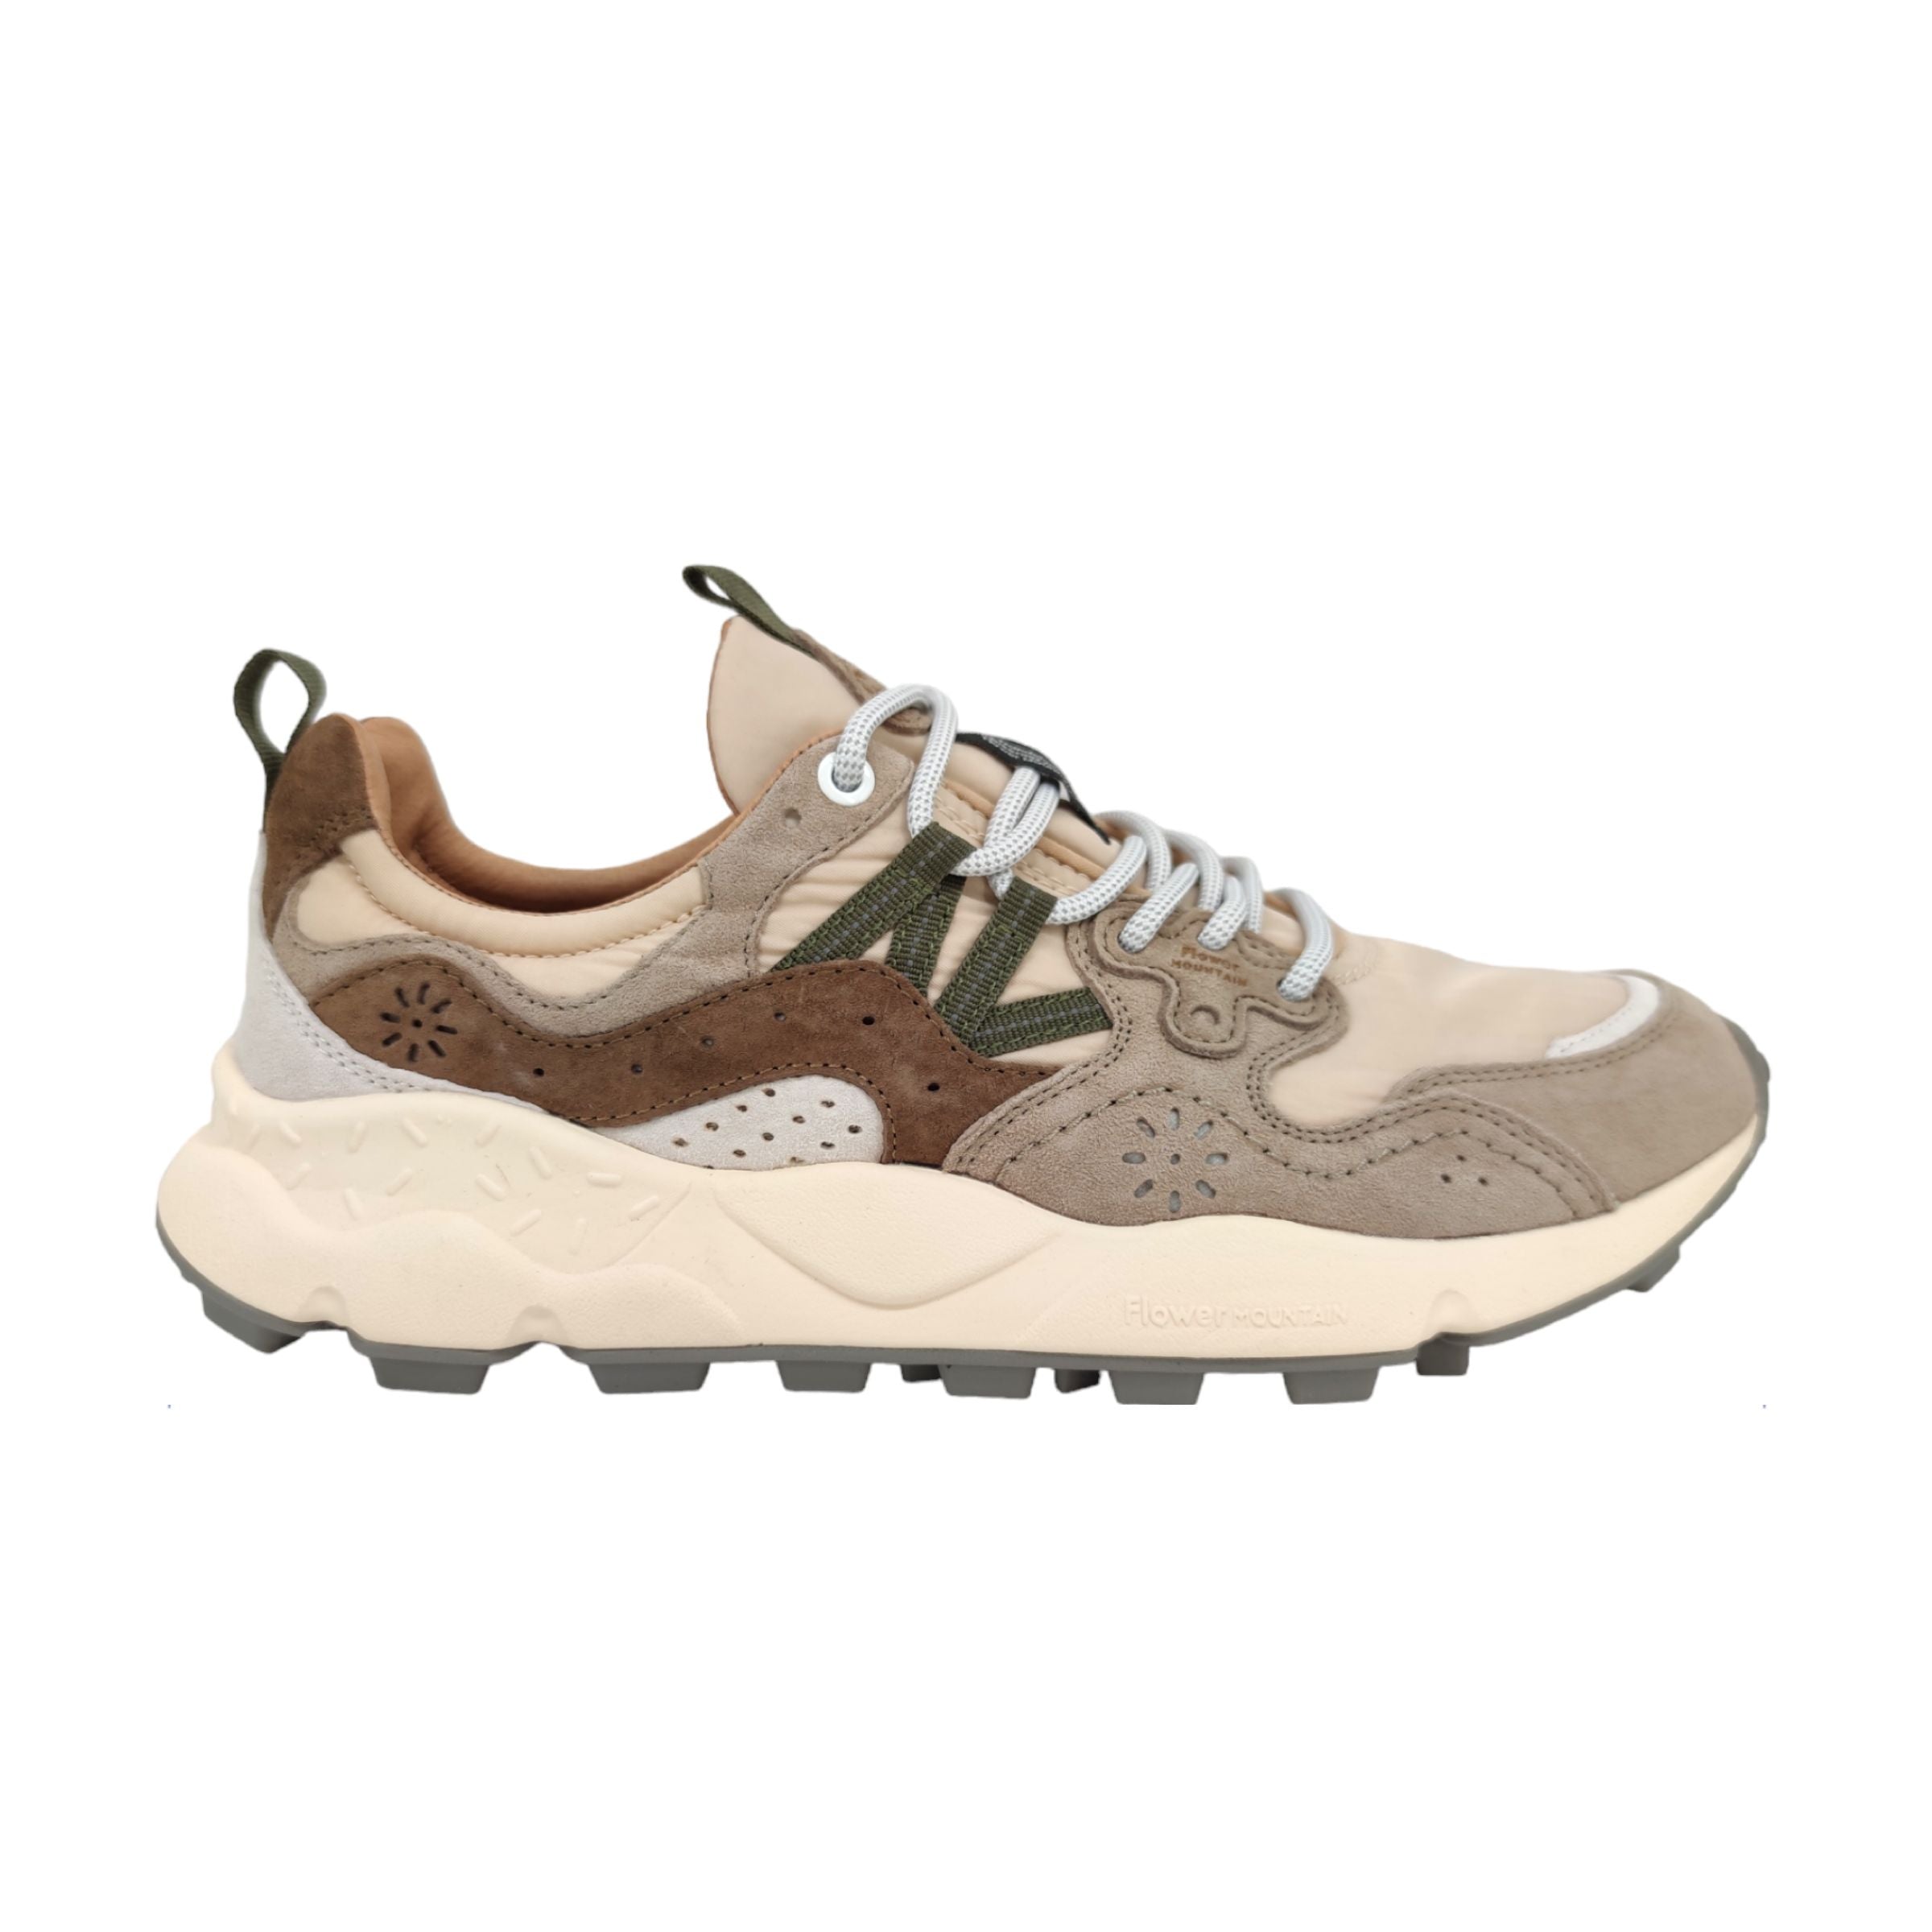 Men's Yamano 3 Shoes Off White/Beige 